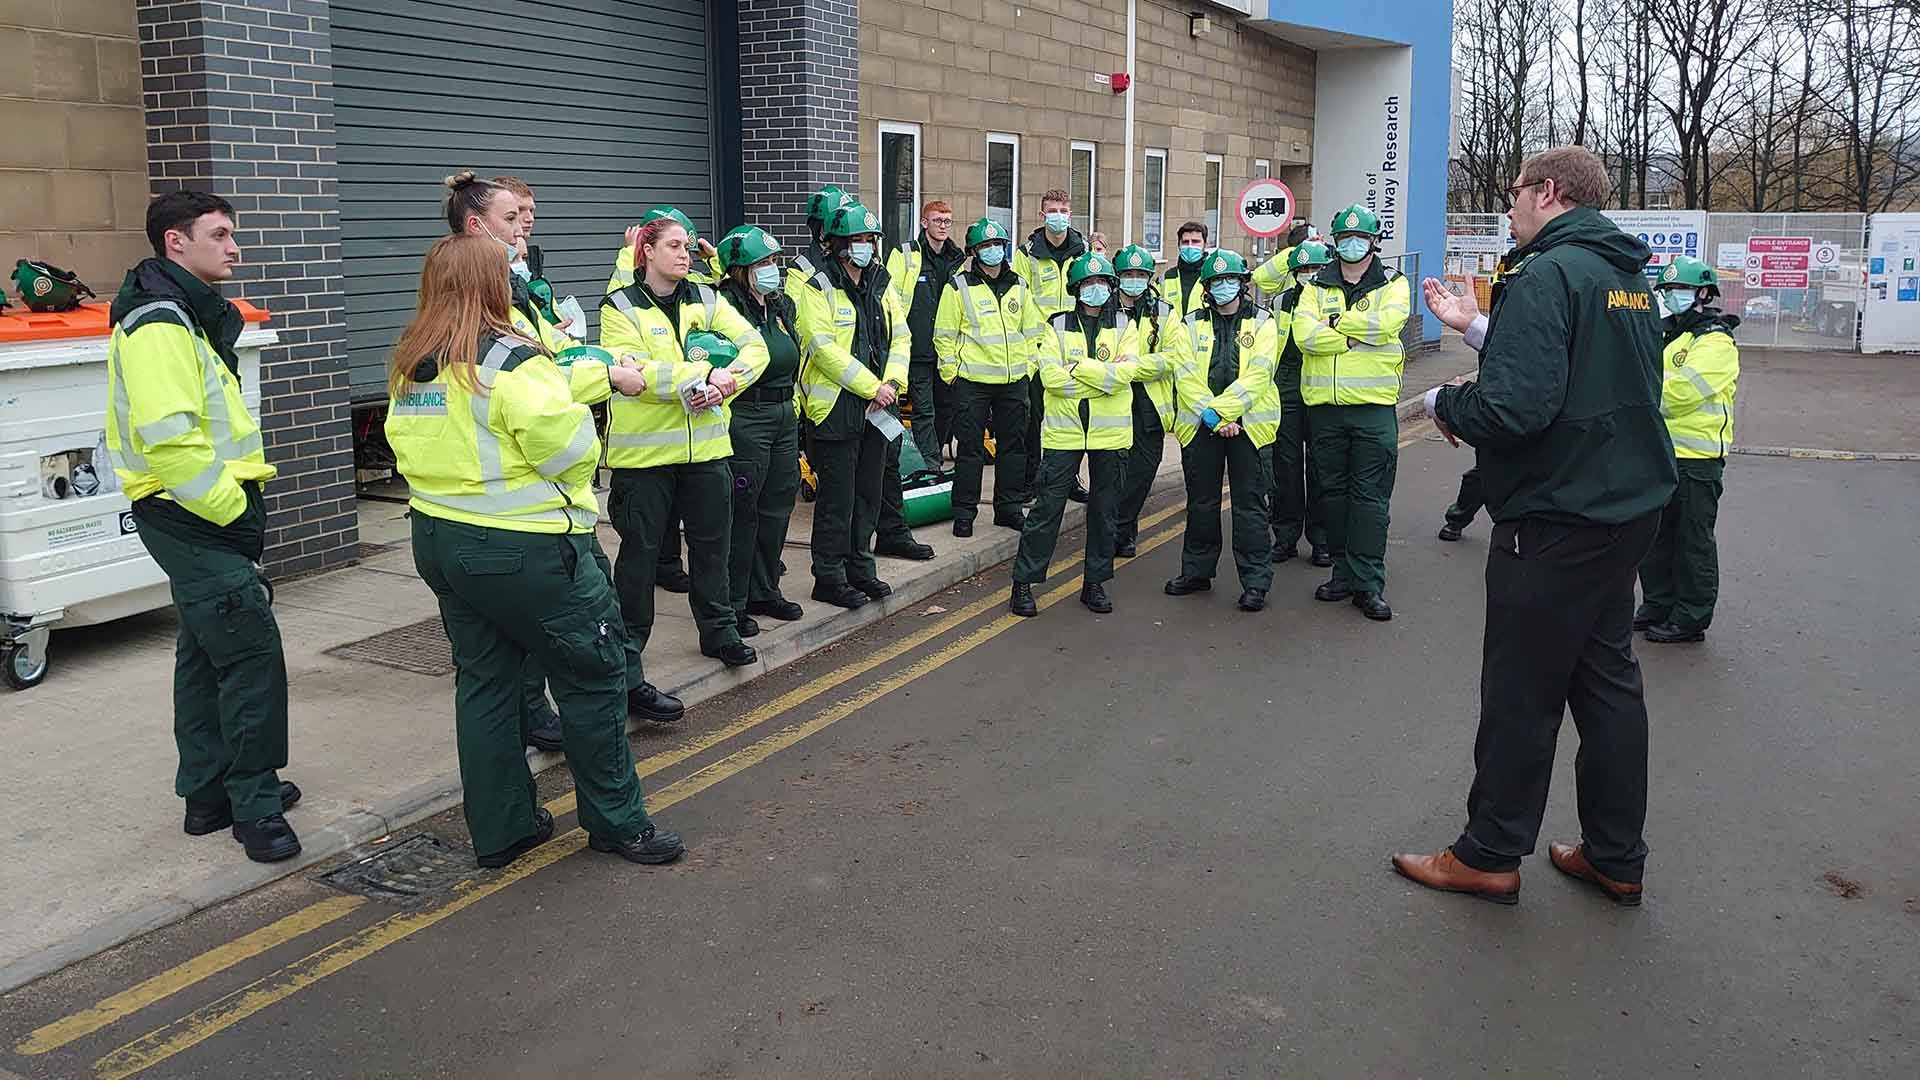 A group of student paramedics outside the Institute of Railway Research